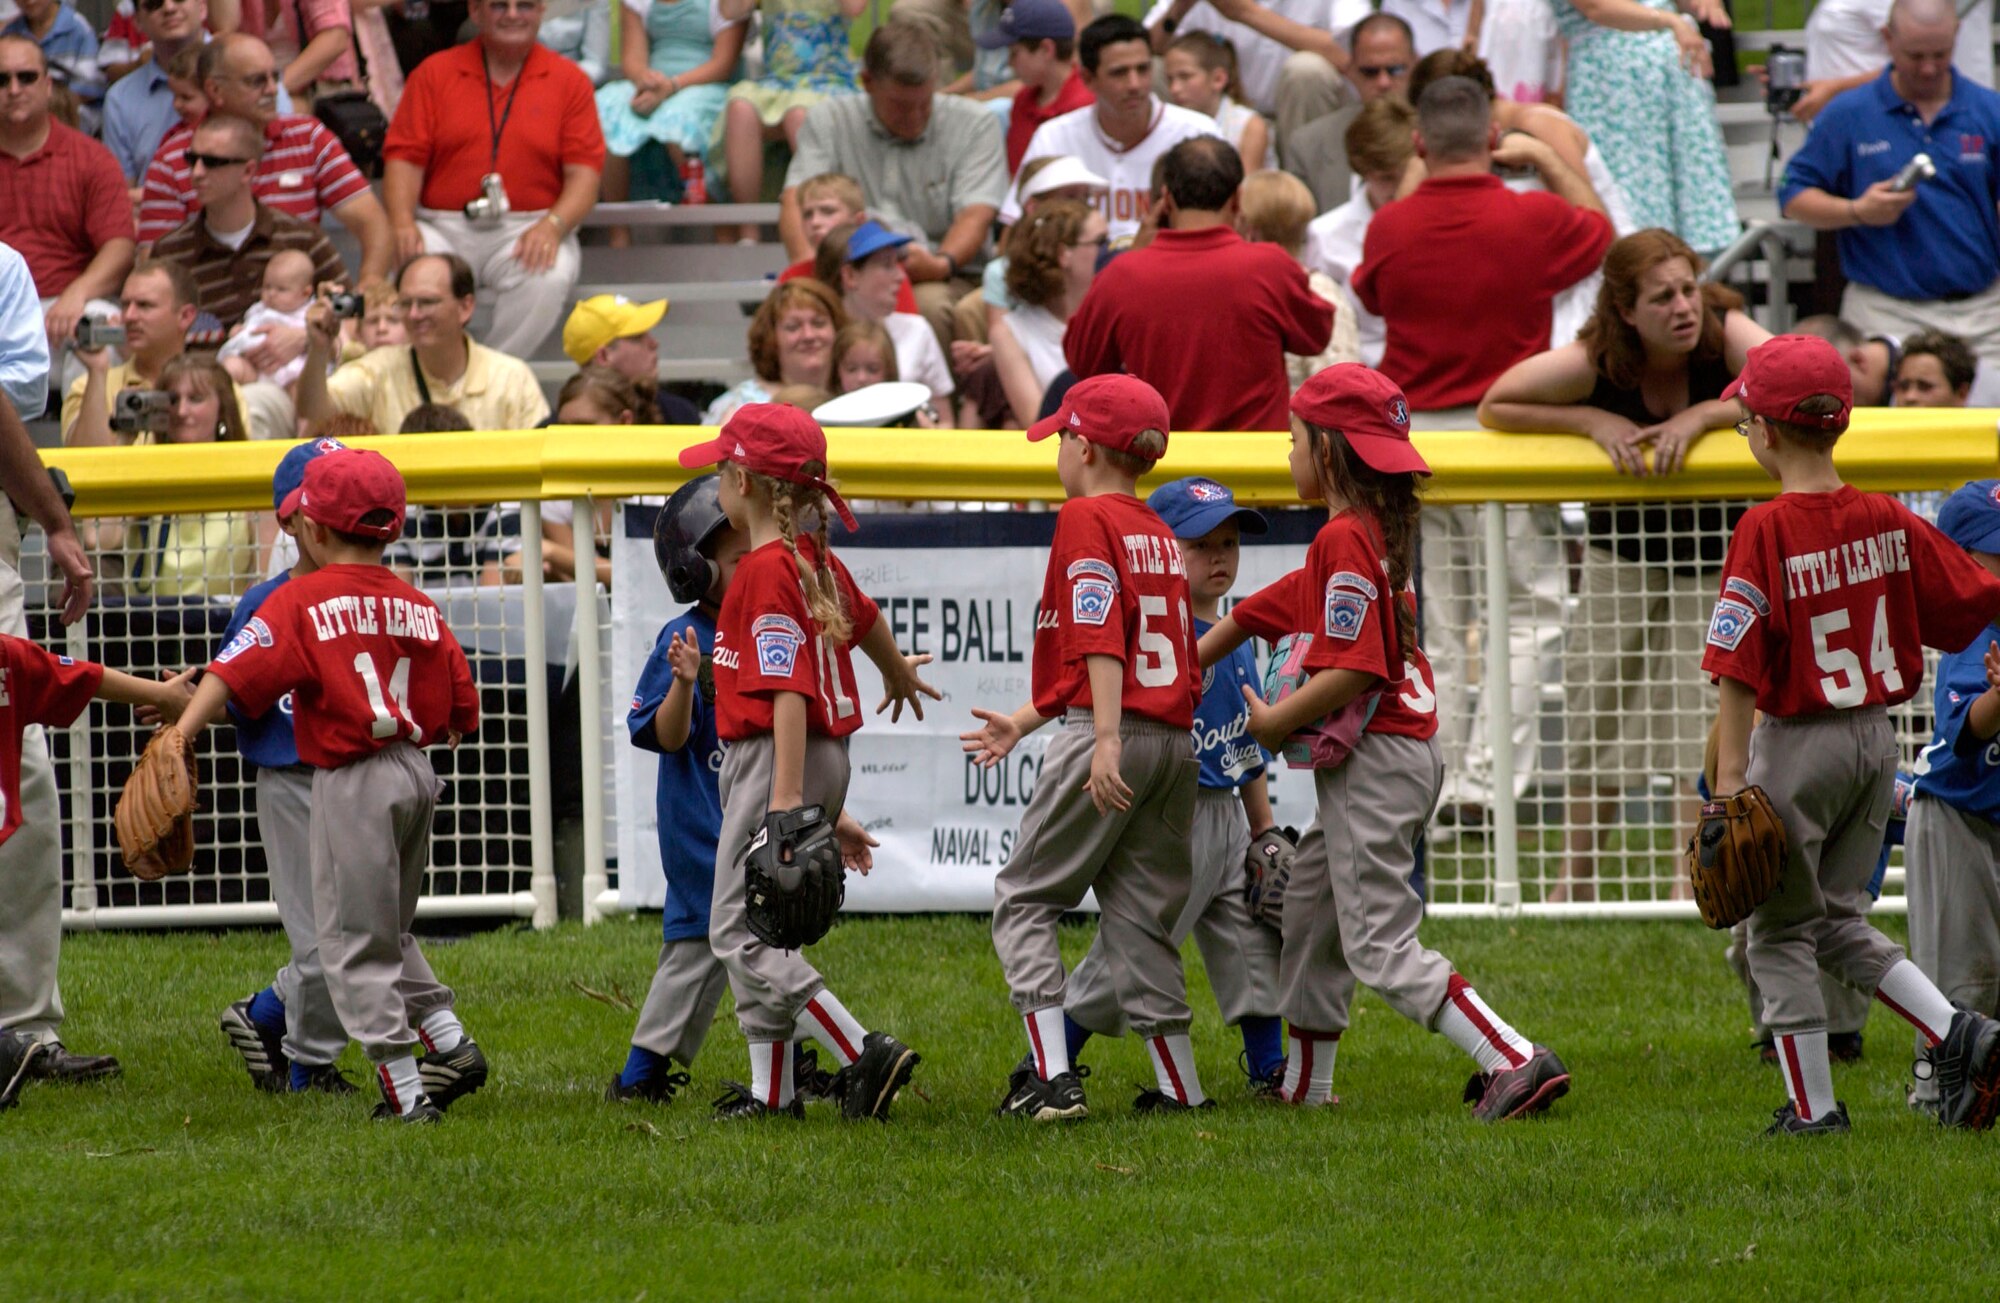 The Little League Yankees, in red, of McGuire Air Force Base, N.J., shake hands with the Dolcom Little League Indians of Naval Submarine Base New London, Groton, Conn., at the conclusion of their game on Friday, June 23. The game, marking the official start of the Little League season, was played on the South Lawn of the White House with President George W. Bush reciting the Little League Pledge with the teams. The two teams were randomly picked for this annual event. (U.S. Air Force photo/Tech. Sgt. Cohen A. Young) 